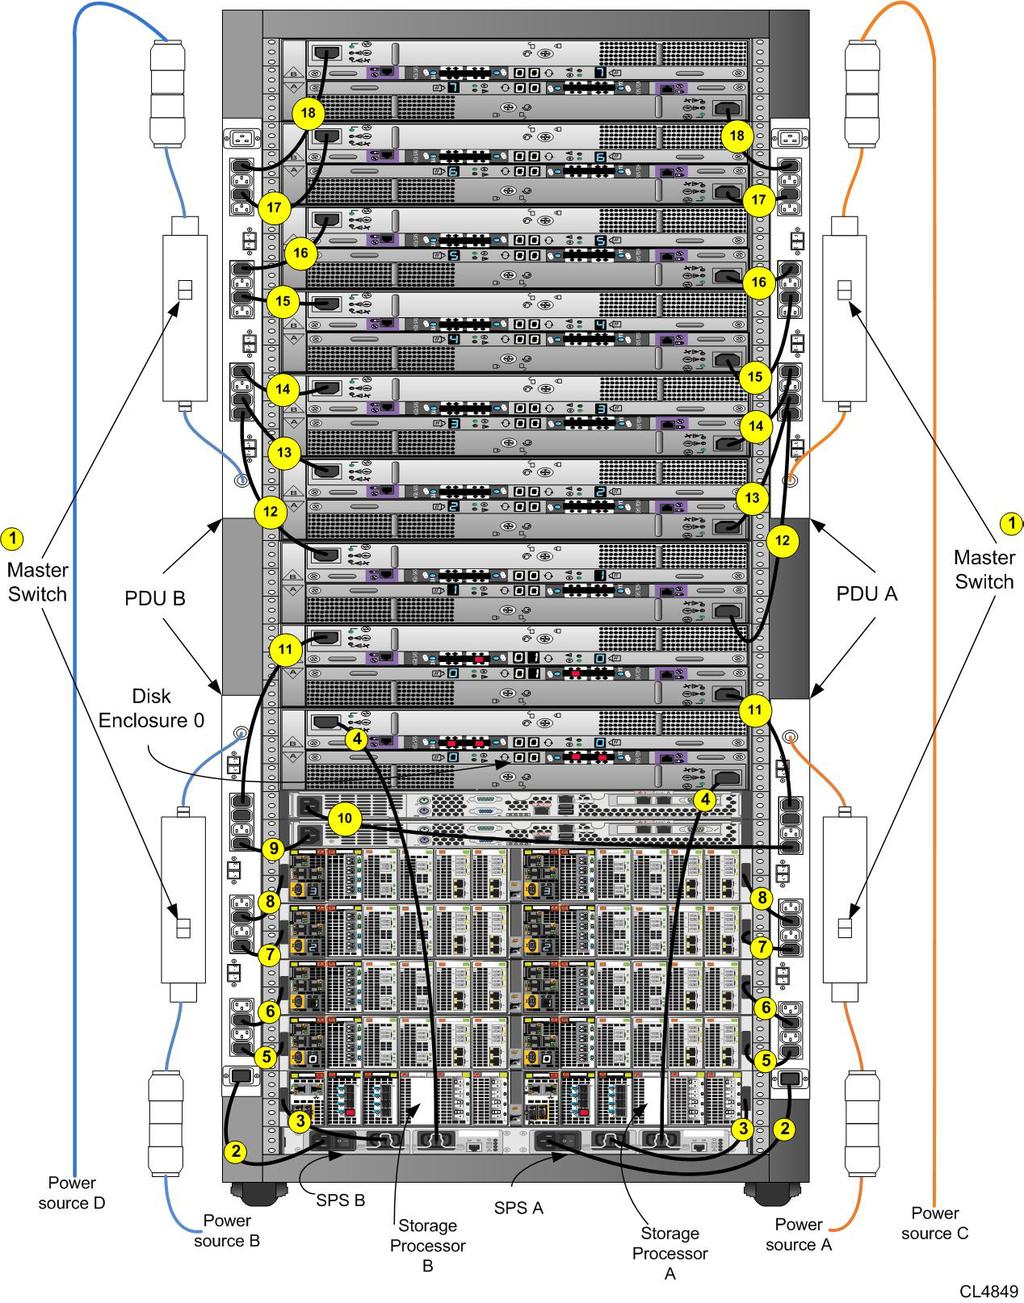 DLm Operations Figure 17! VNX7500 cabinet CAUTION The DLm bays and power systems are designed to support DLm equipment only.